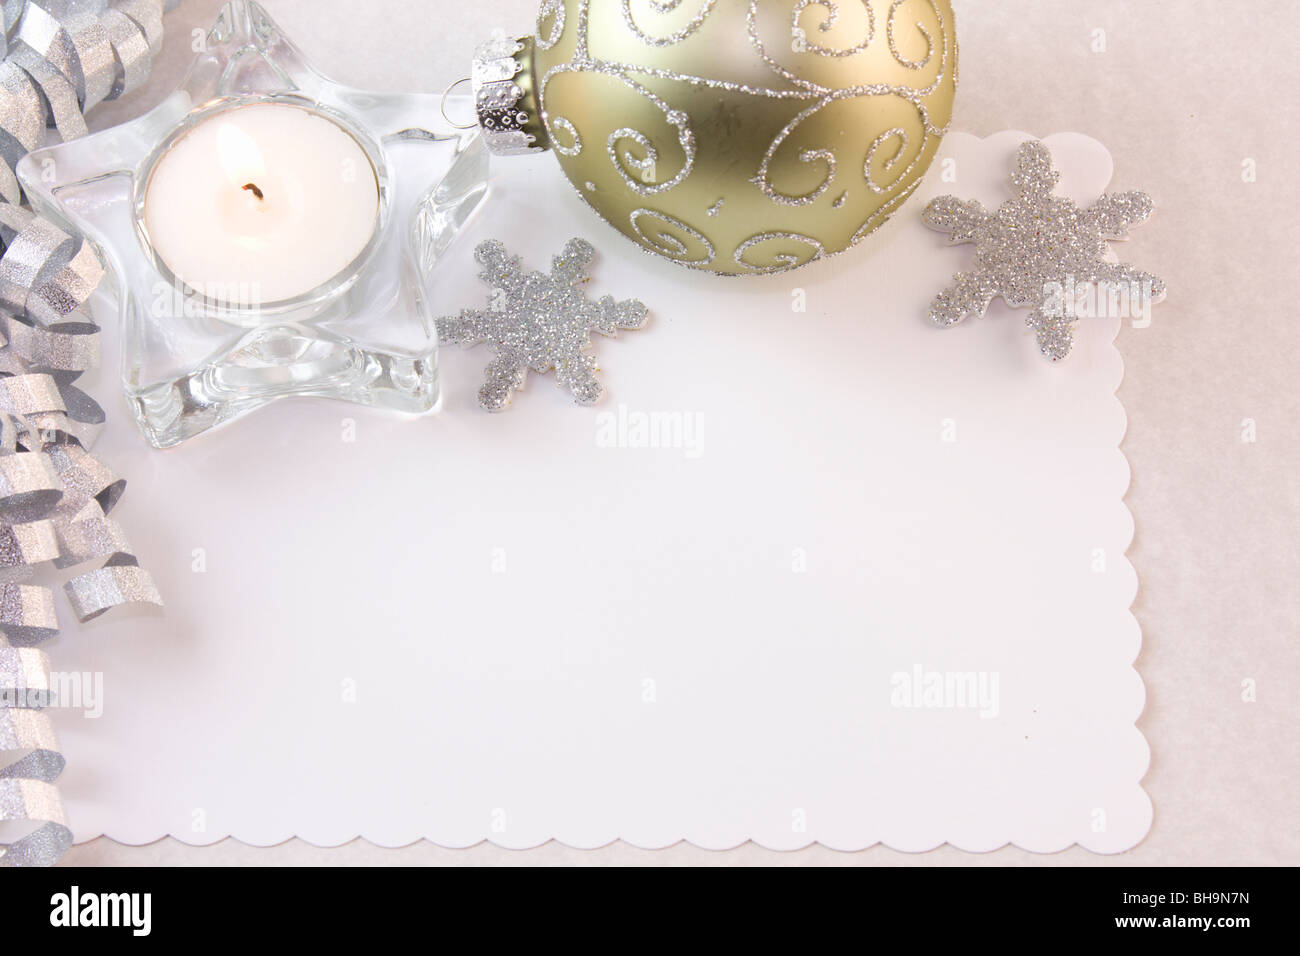 blank Christmas card with tea light candle and silver decorations Stock Photo